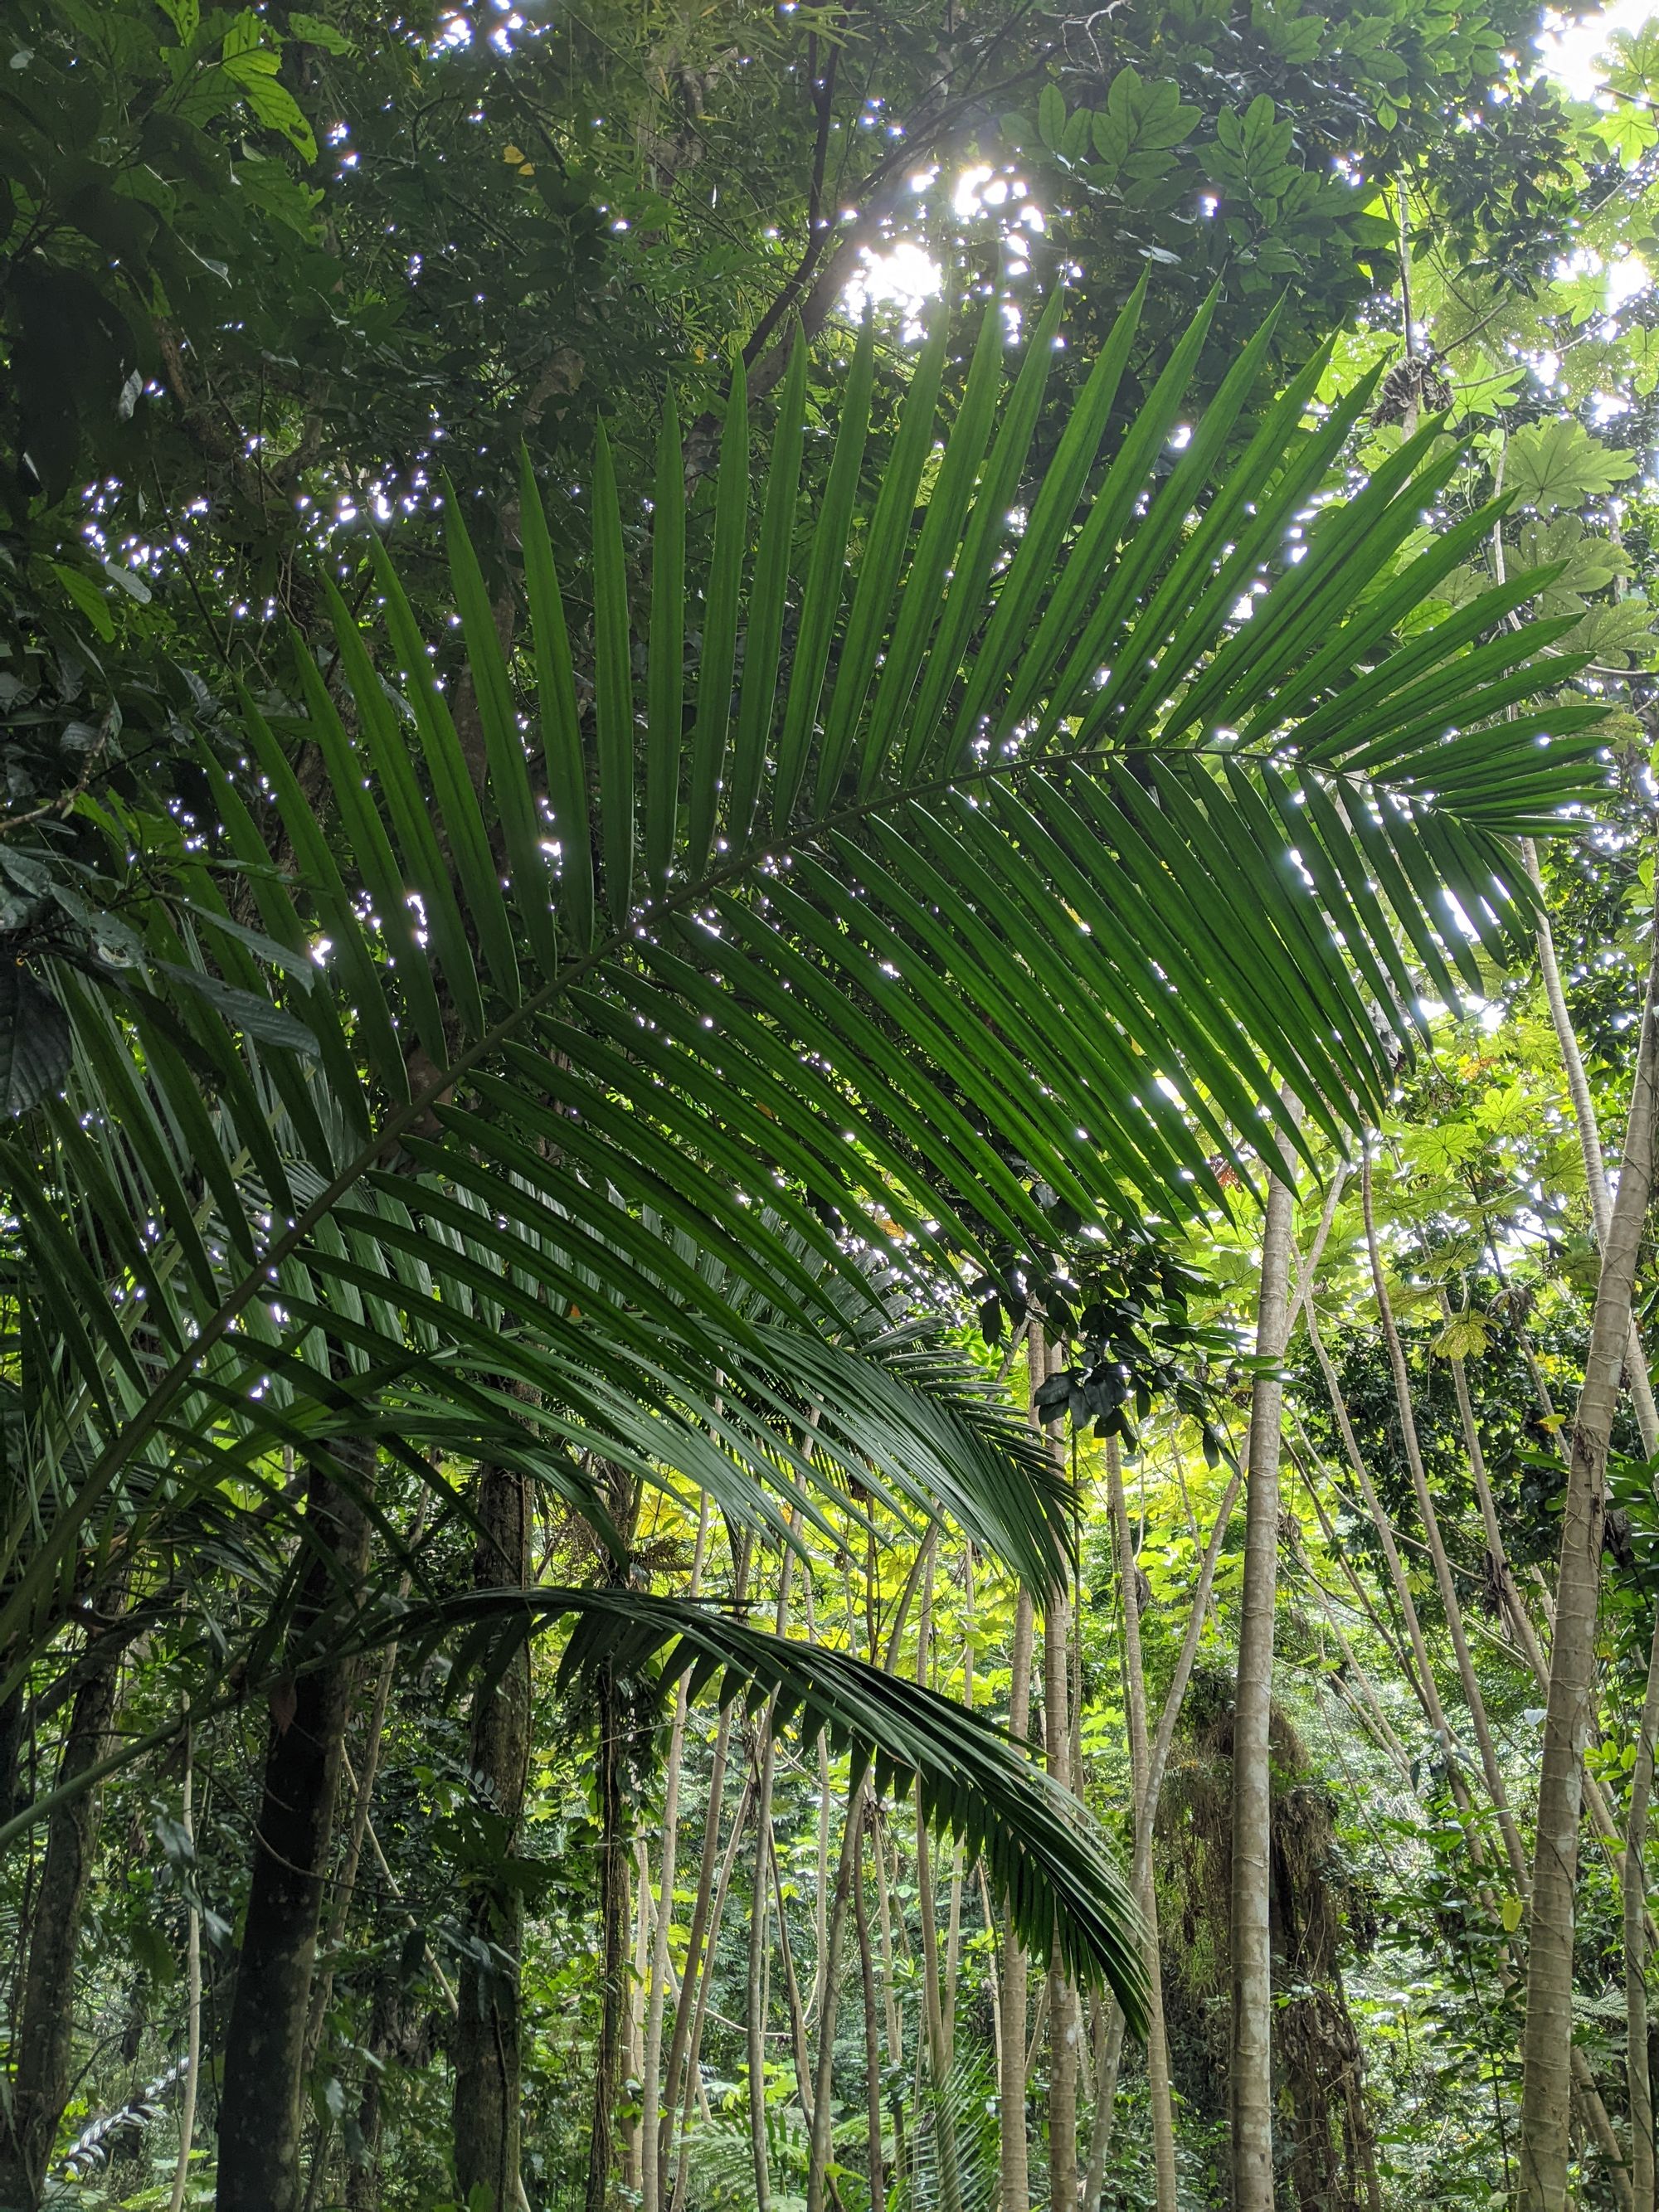 One of many beautiful palm leaves arching over the trail.